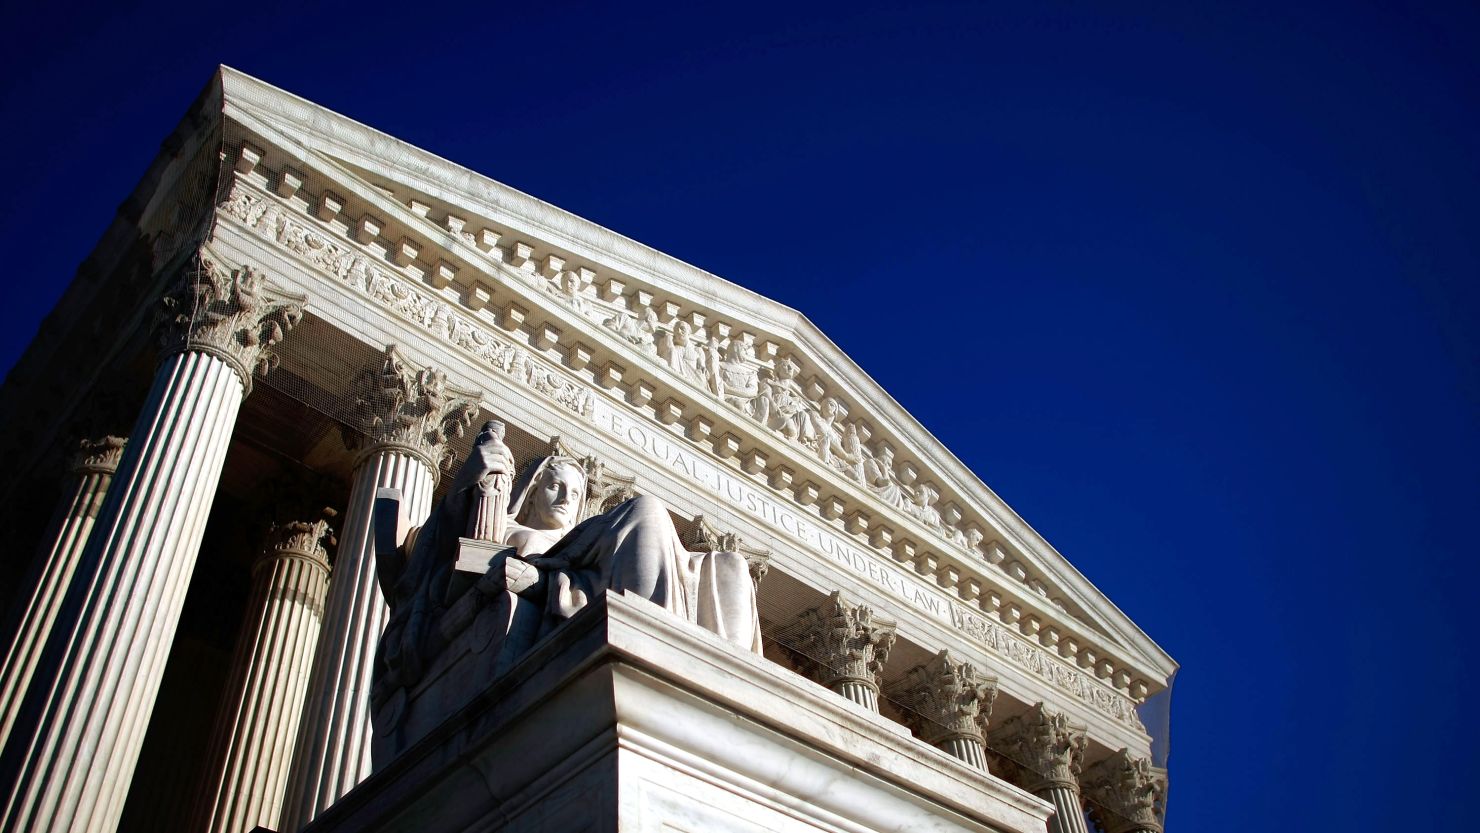 The U.S. Supreme Court will hear oral arguments on same-sex marriage next week.